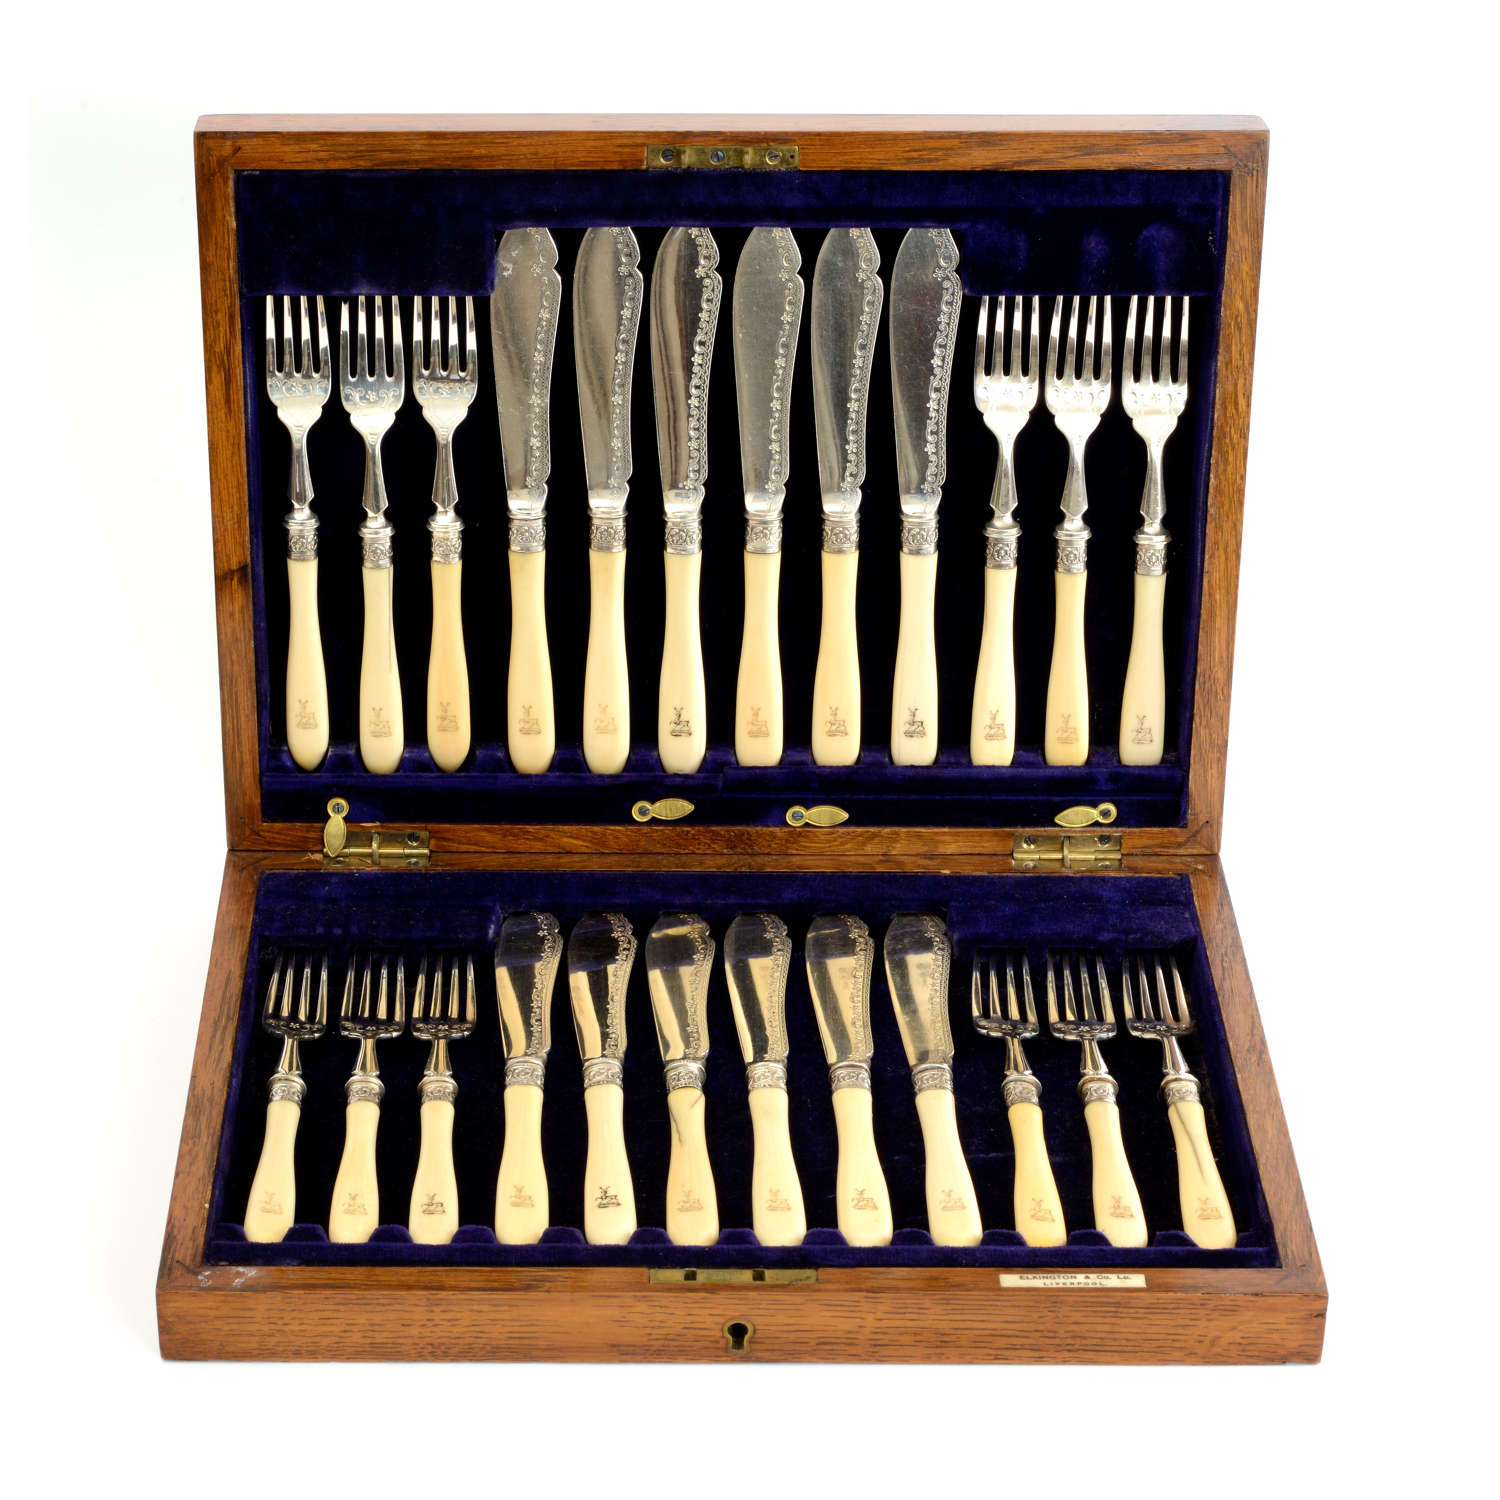 A Boxed set of Silver Fish or Starter Knives and Forks, 1909.